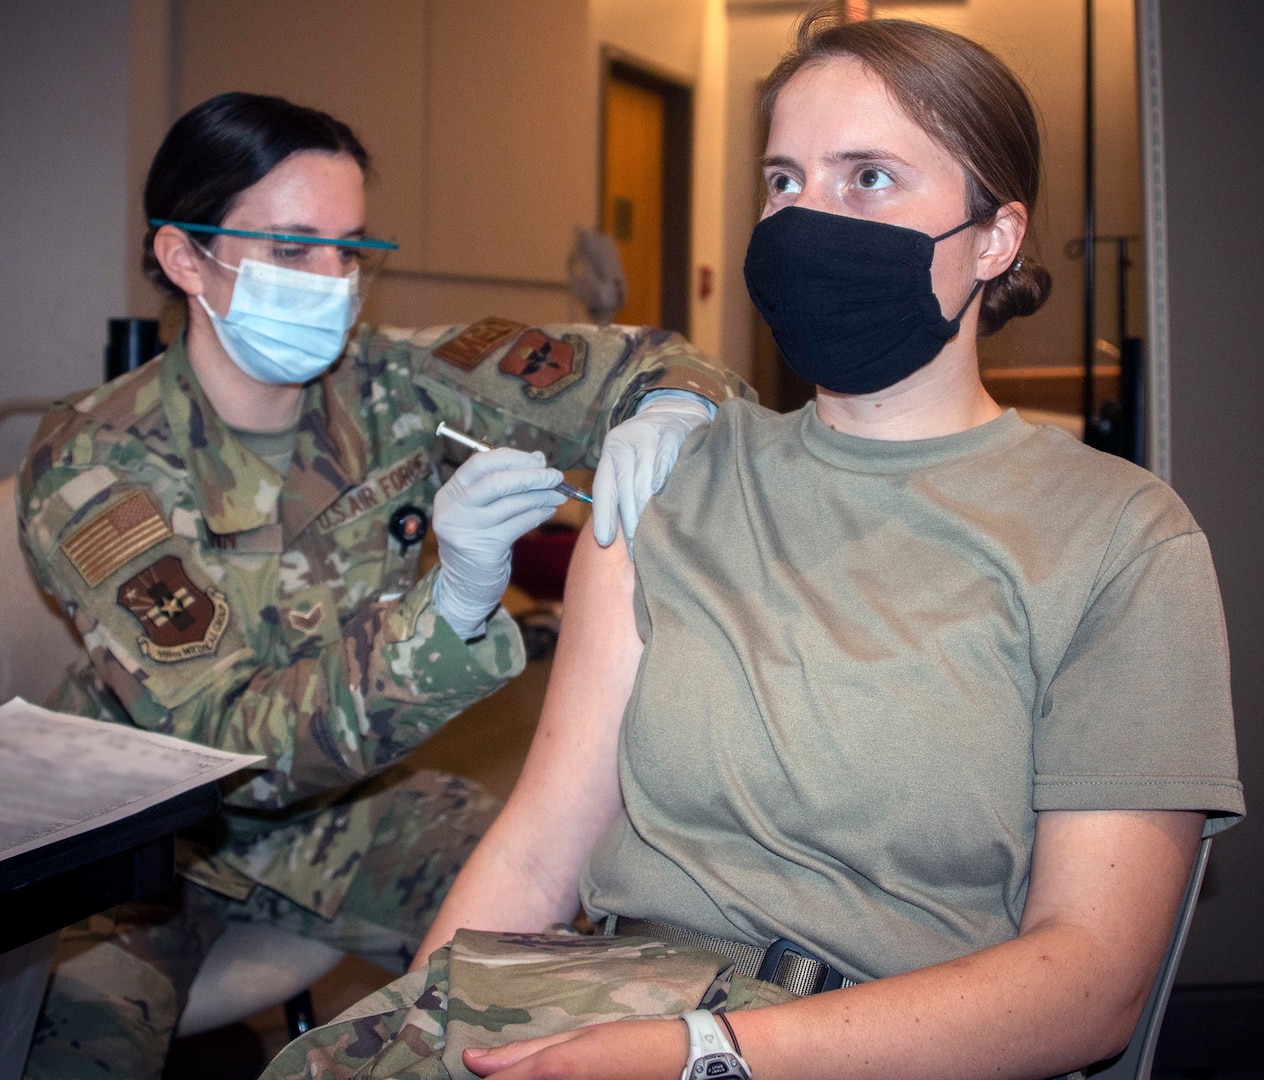 Air Force Senior Airman Kasey Ginn, medical technician, administers the COVID-19 vaccine to Army Capt. Christine Kasprisin, physical therapist, at Brooke Army Medical Center, Joint Base San Antonio-Fort Sam Houston Jan. 26.